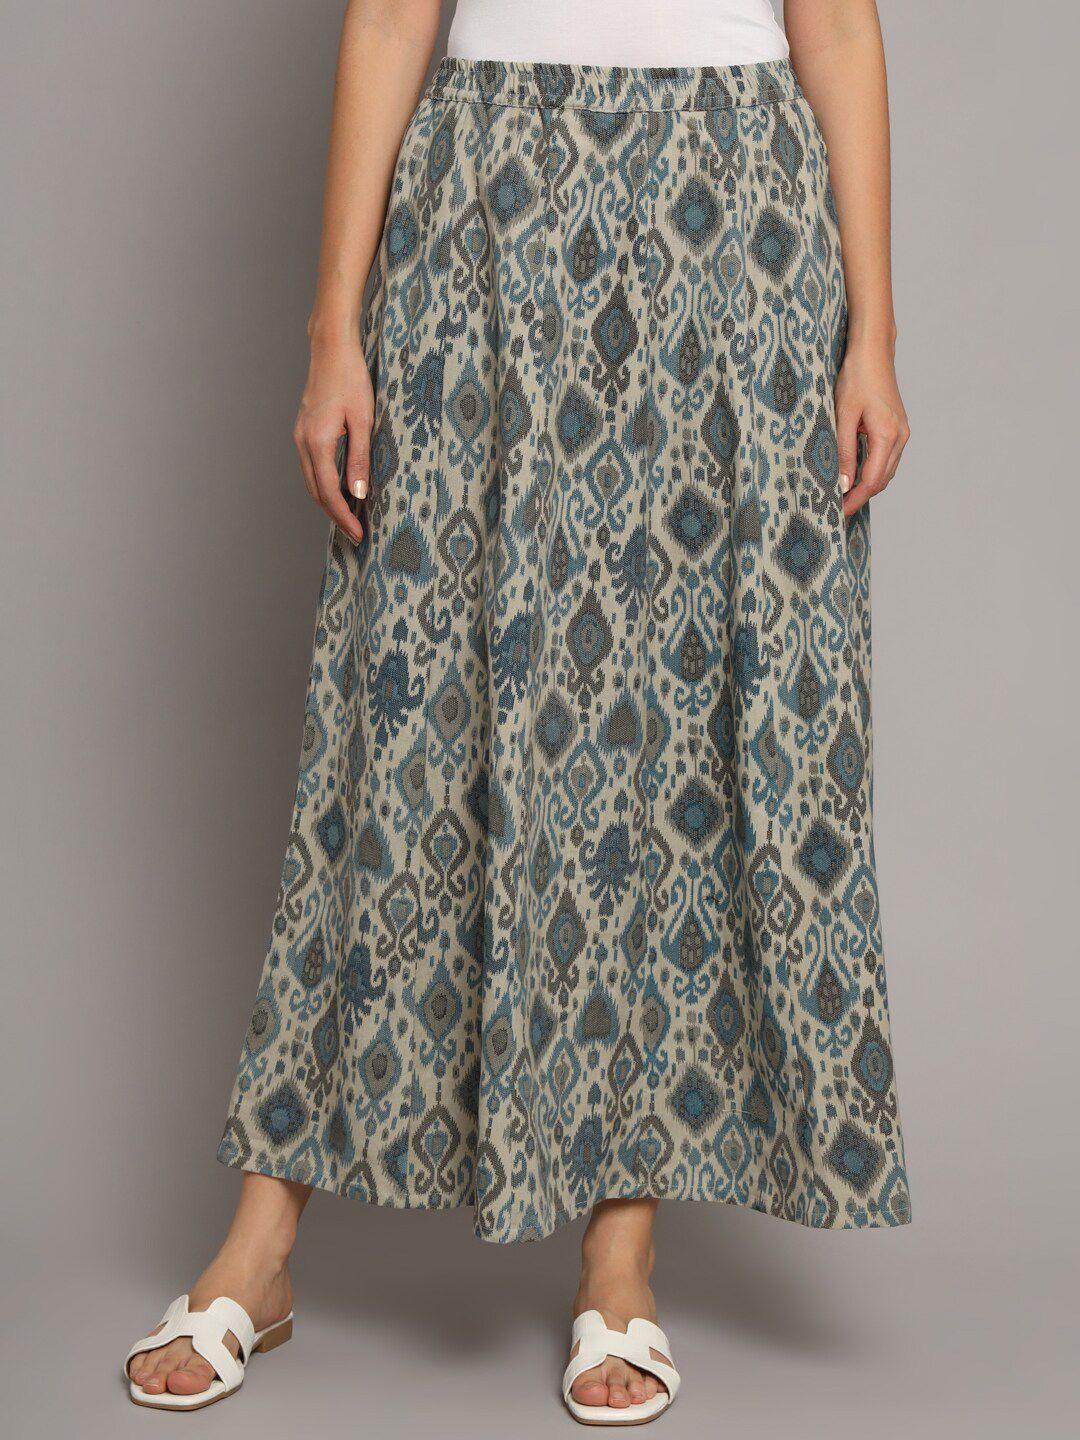 deckedup ethnic printed pure cotton flared skirt